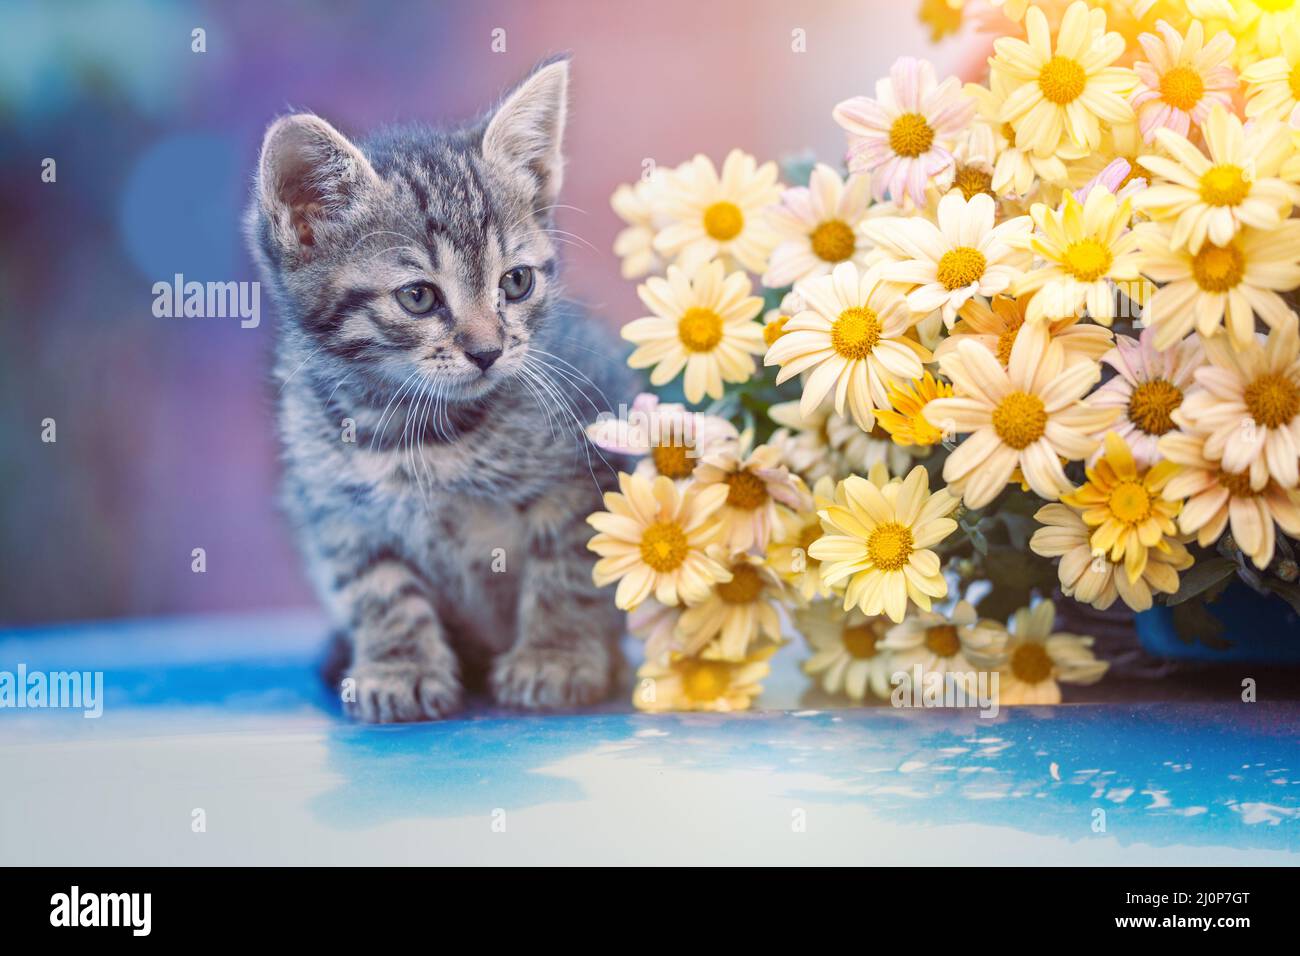 Cute little kitten with a bouquet of yellow chrysanthemum flowers Stock Photo